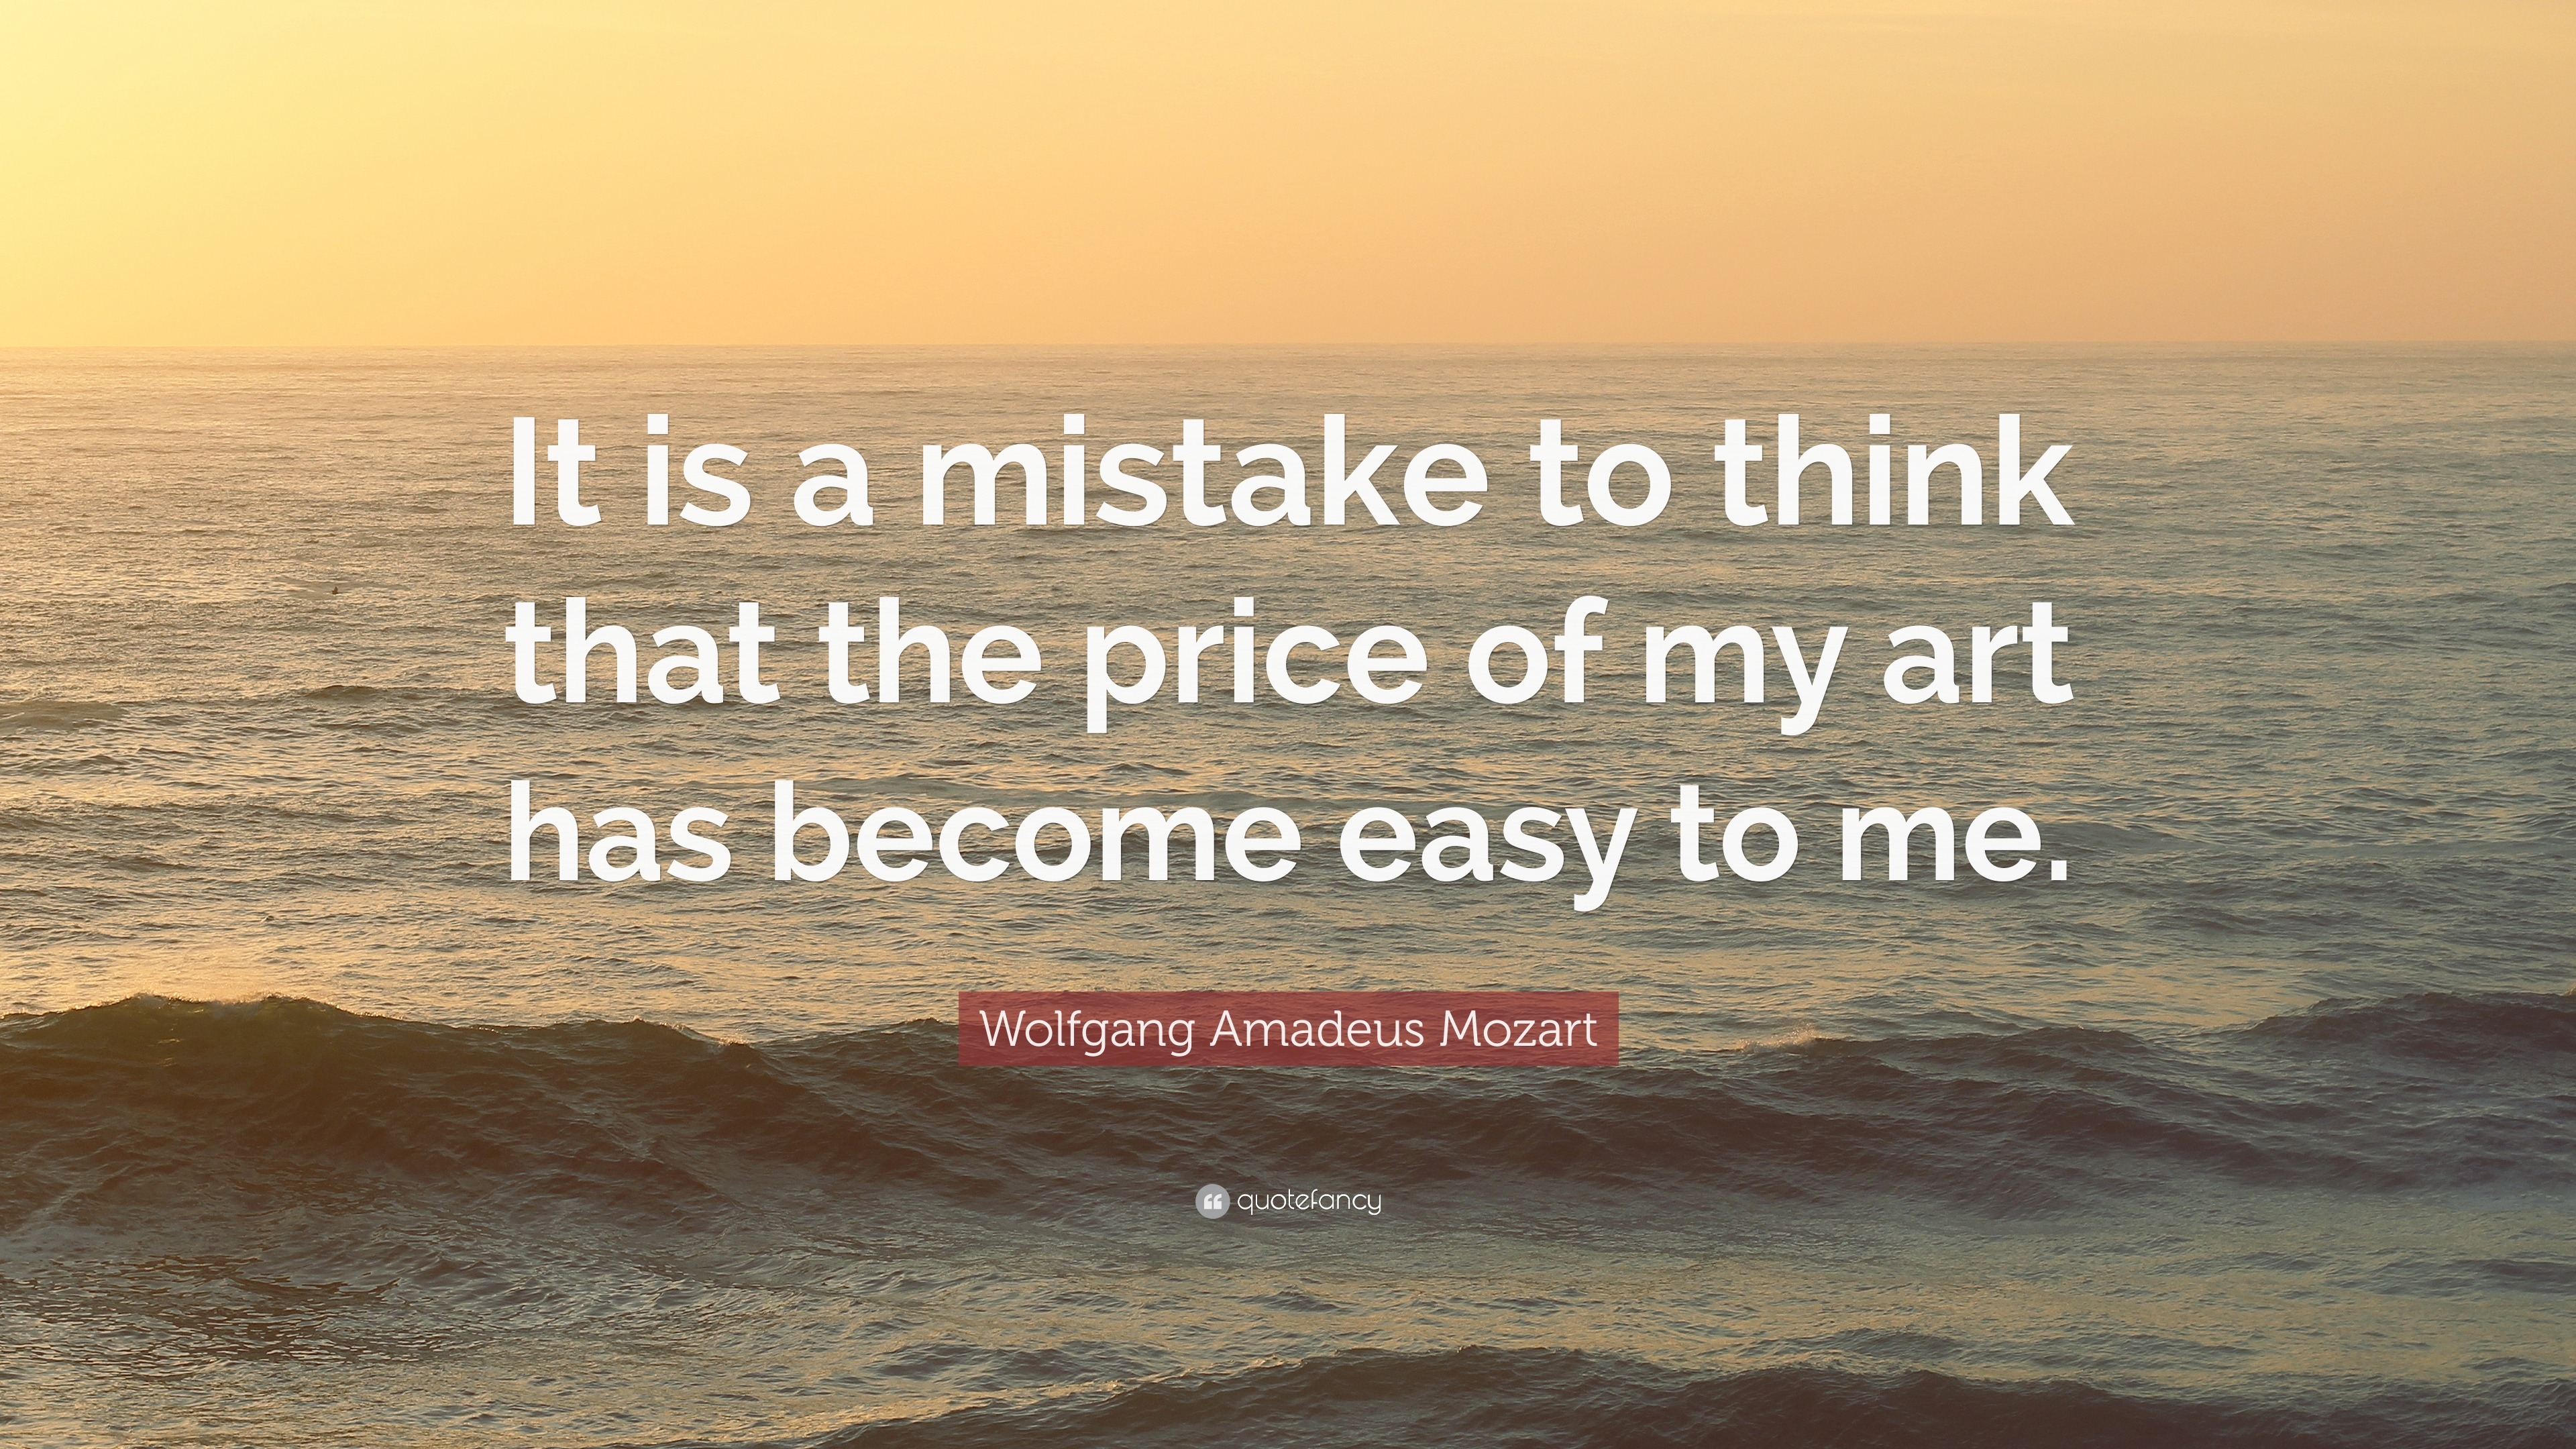 Wolfgang Amadeus Mozart Quote: “It is a mistake to think that the price ...